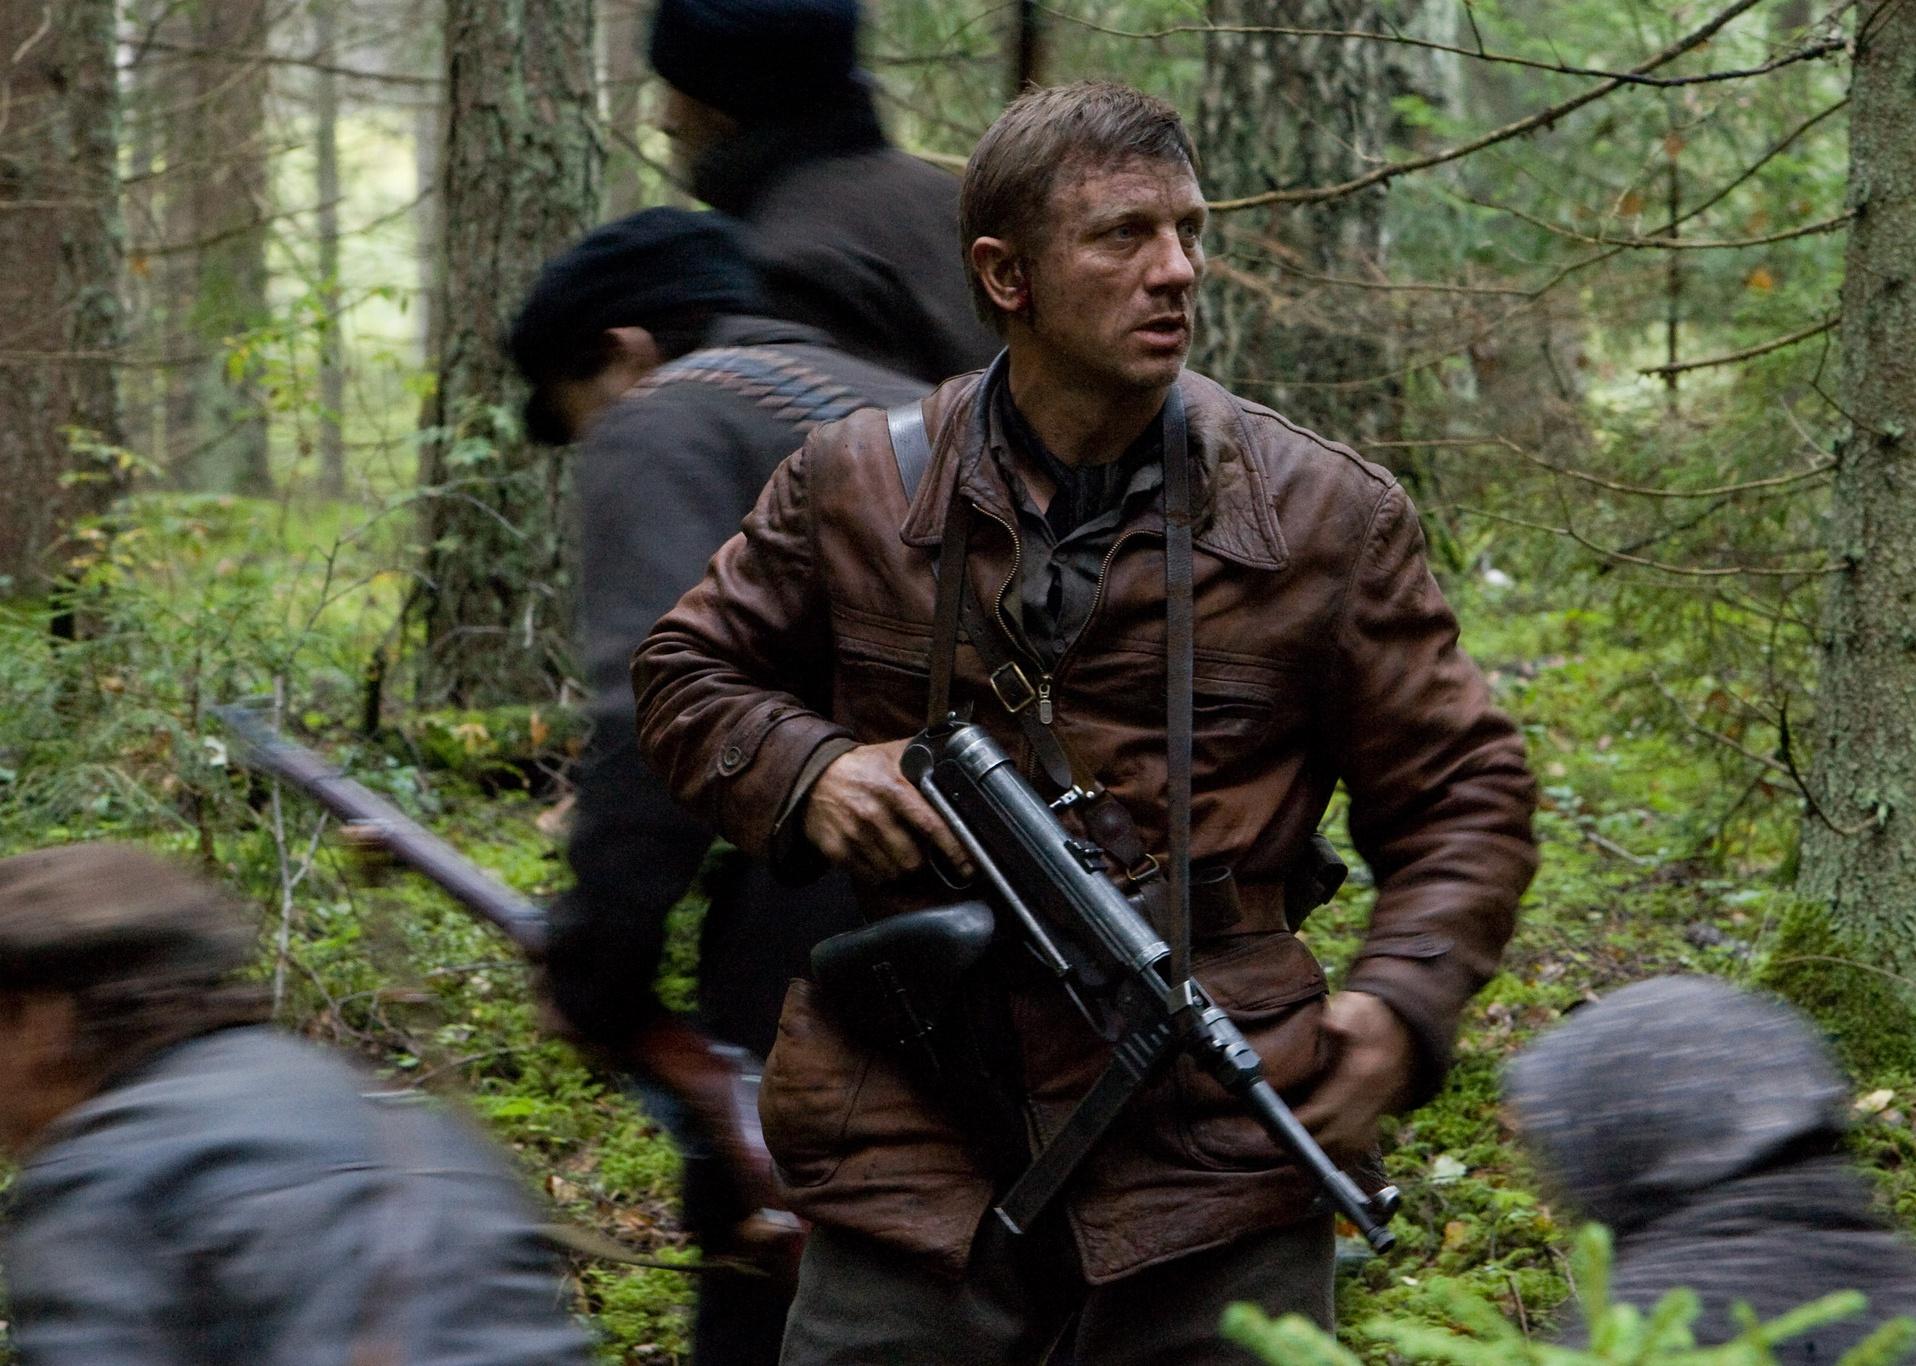 Daniel Craig in a brown leather jacket standing guard with a large gun around his chest as people pass through the woods.